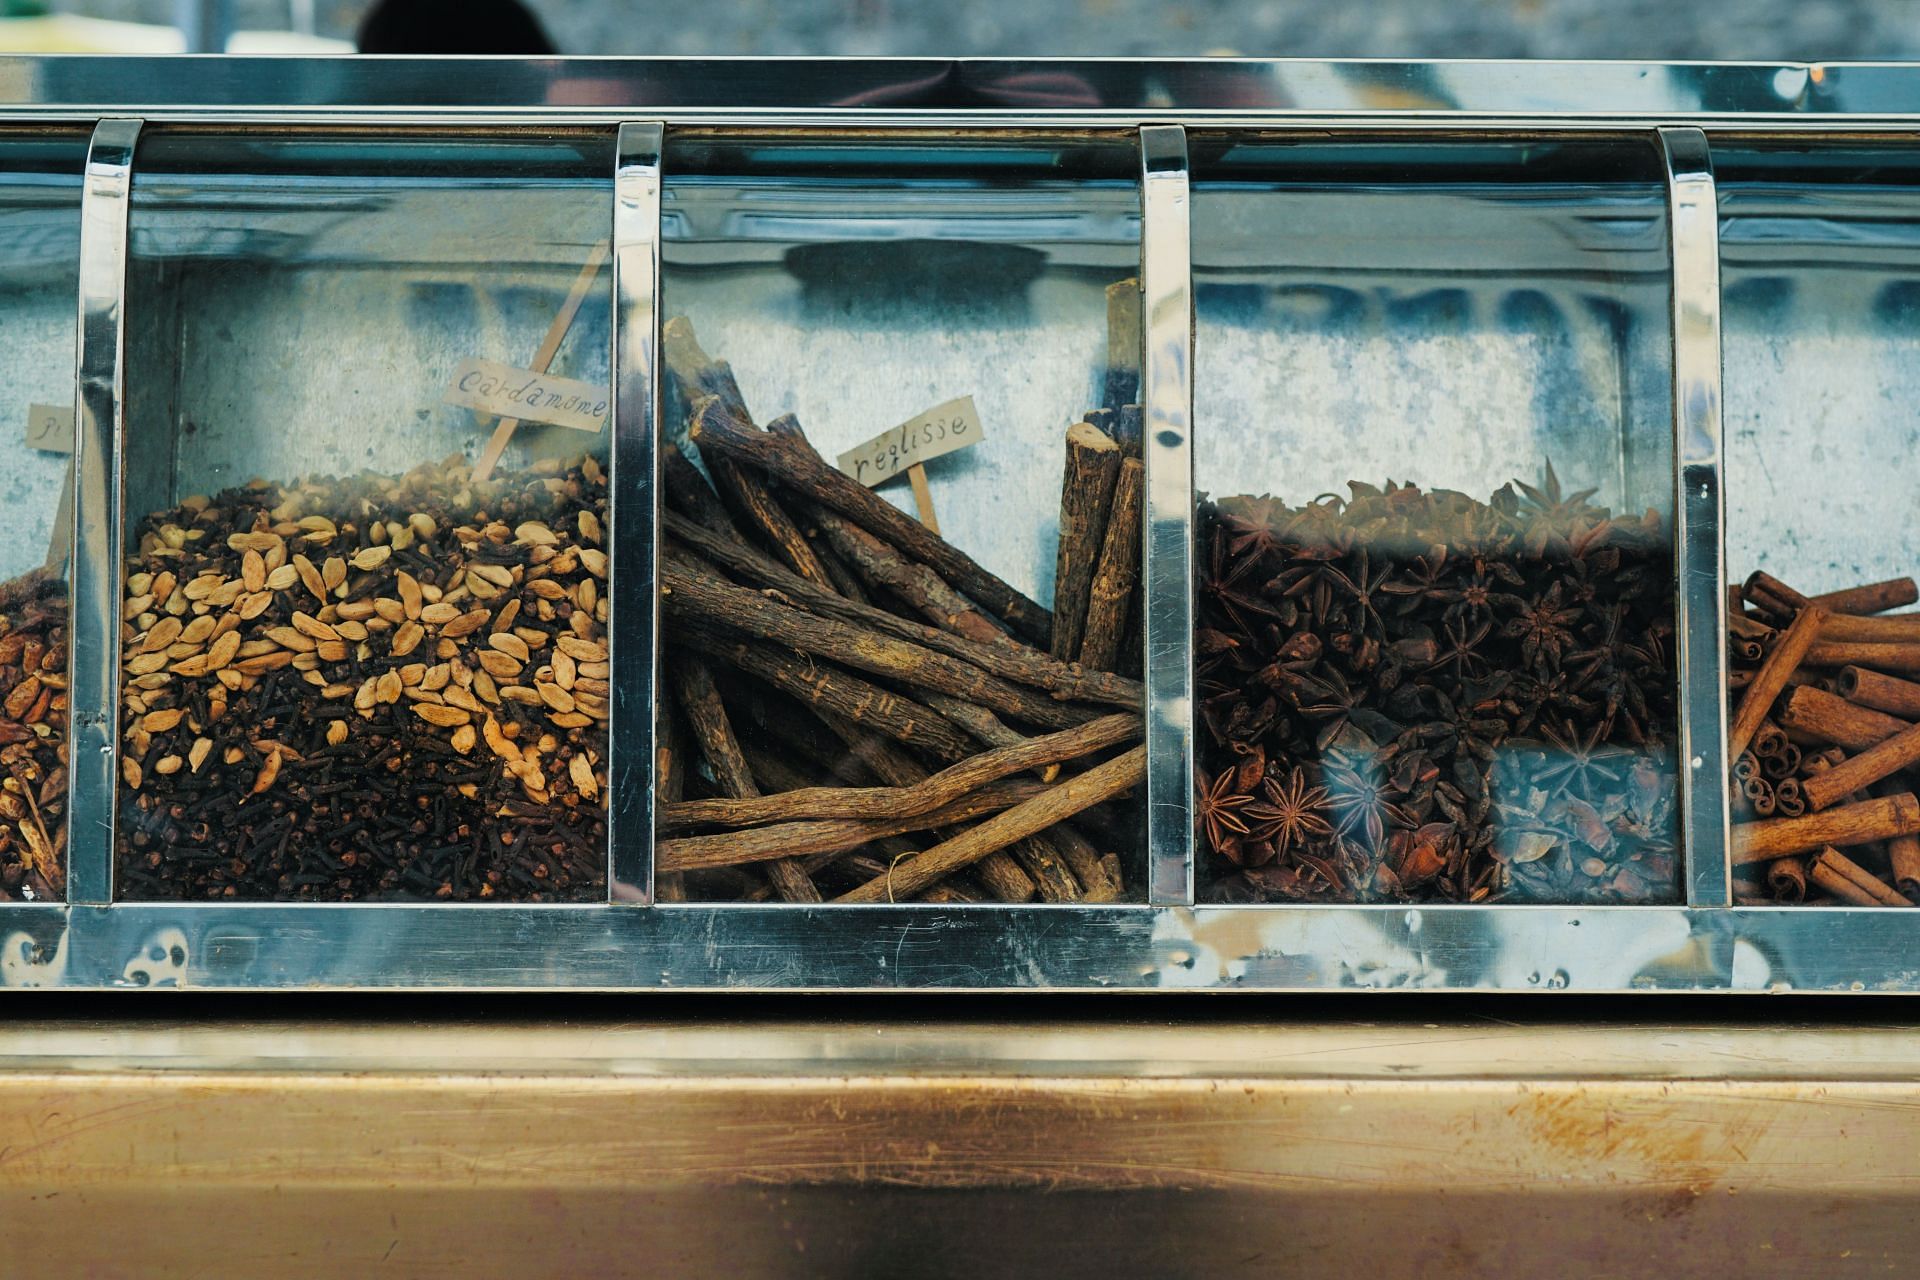 Licorice root is among the most popular medicinal herbs (Image via Unsplash/Erwan Hesry)